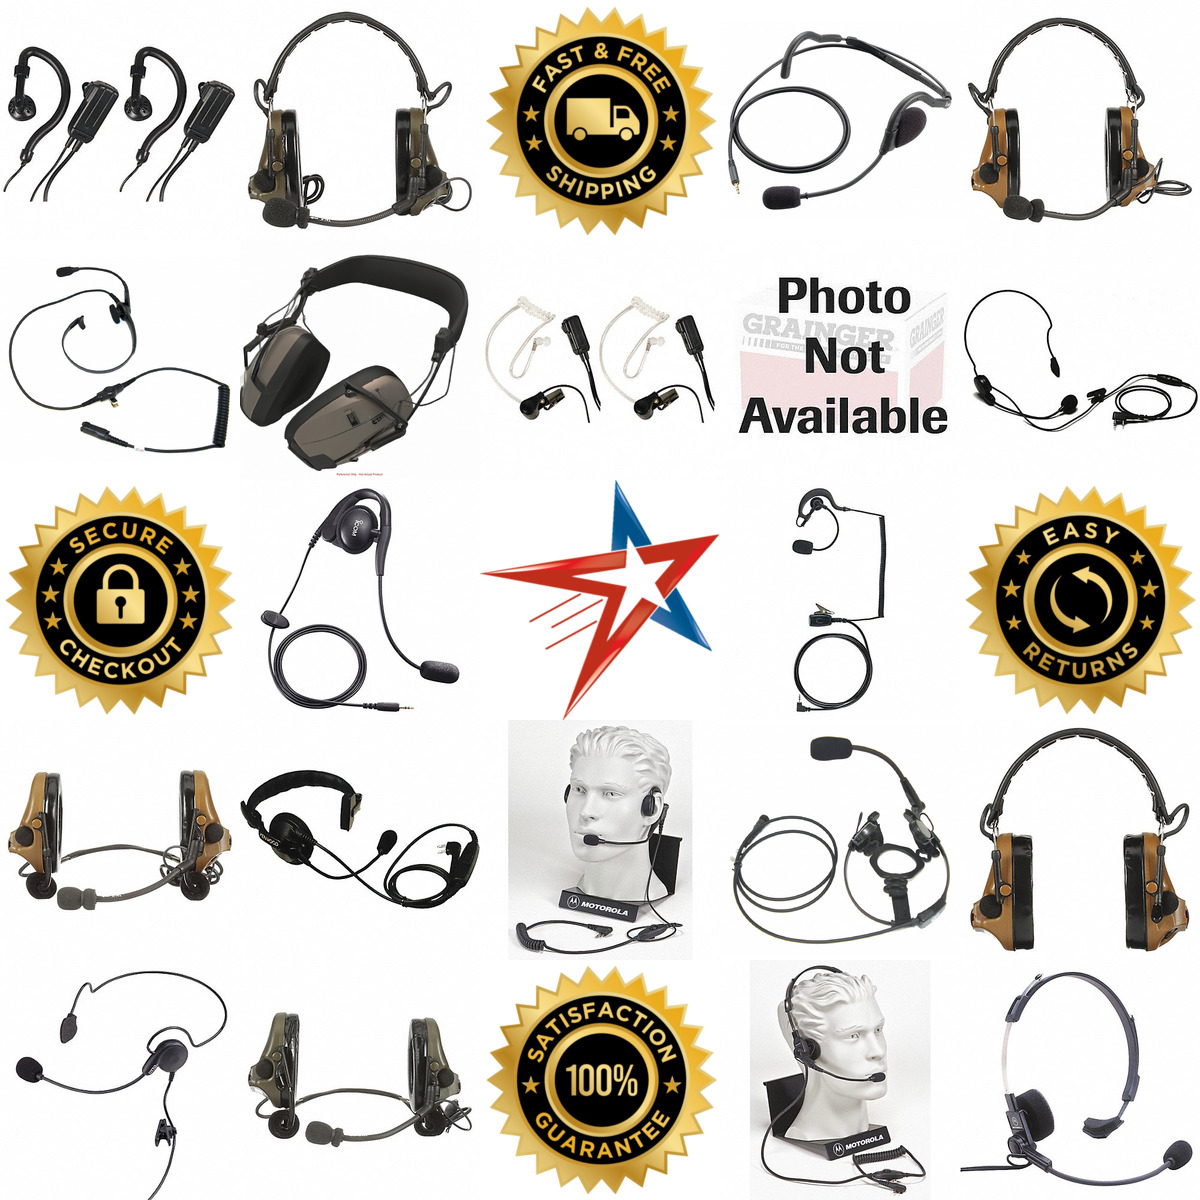 A selection of Two Way Radio Headsets products on GoVets